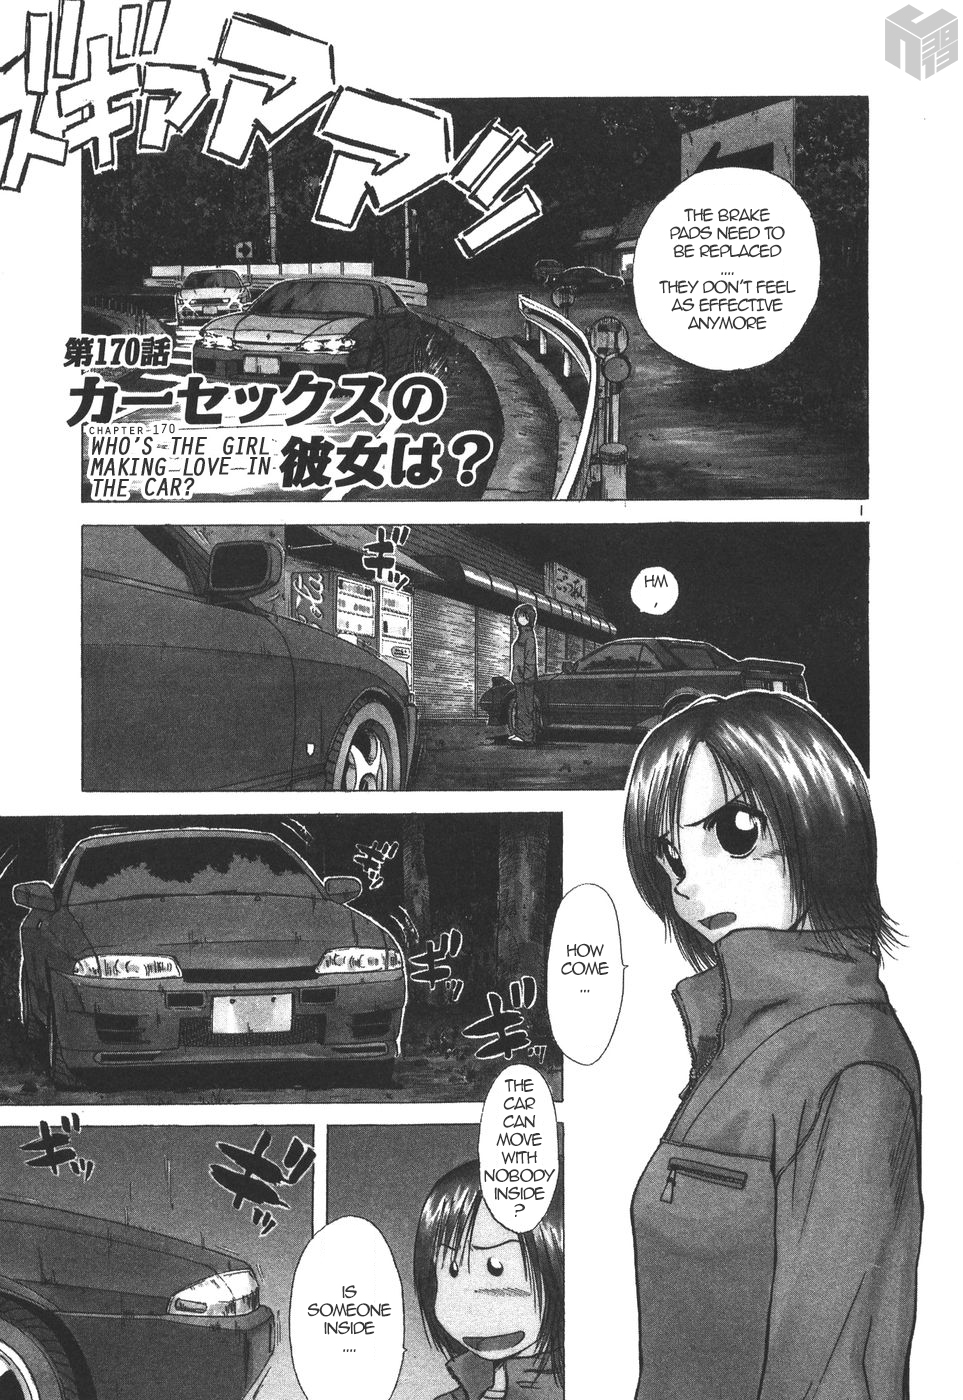 Over Rev! Vol.15 Chapter 170: Who S The Girl Making Love In The Car? - Picture 1